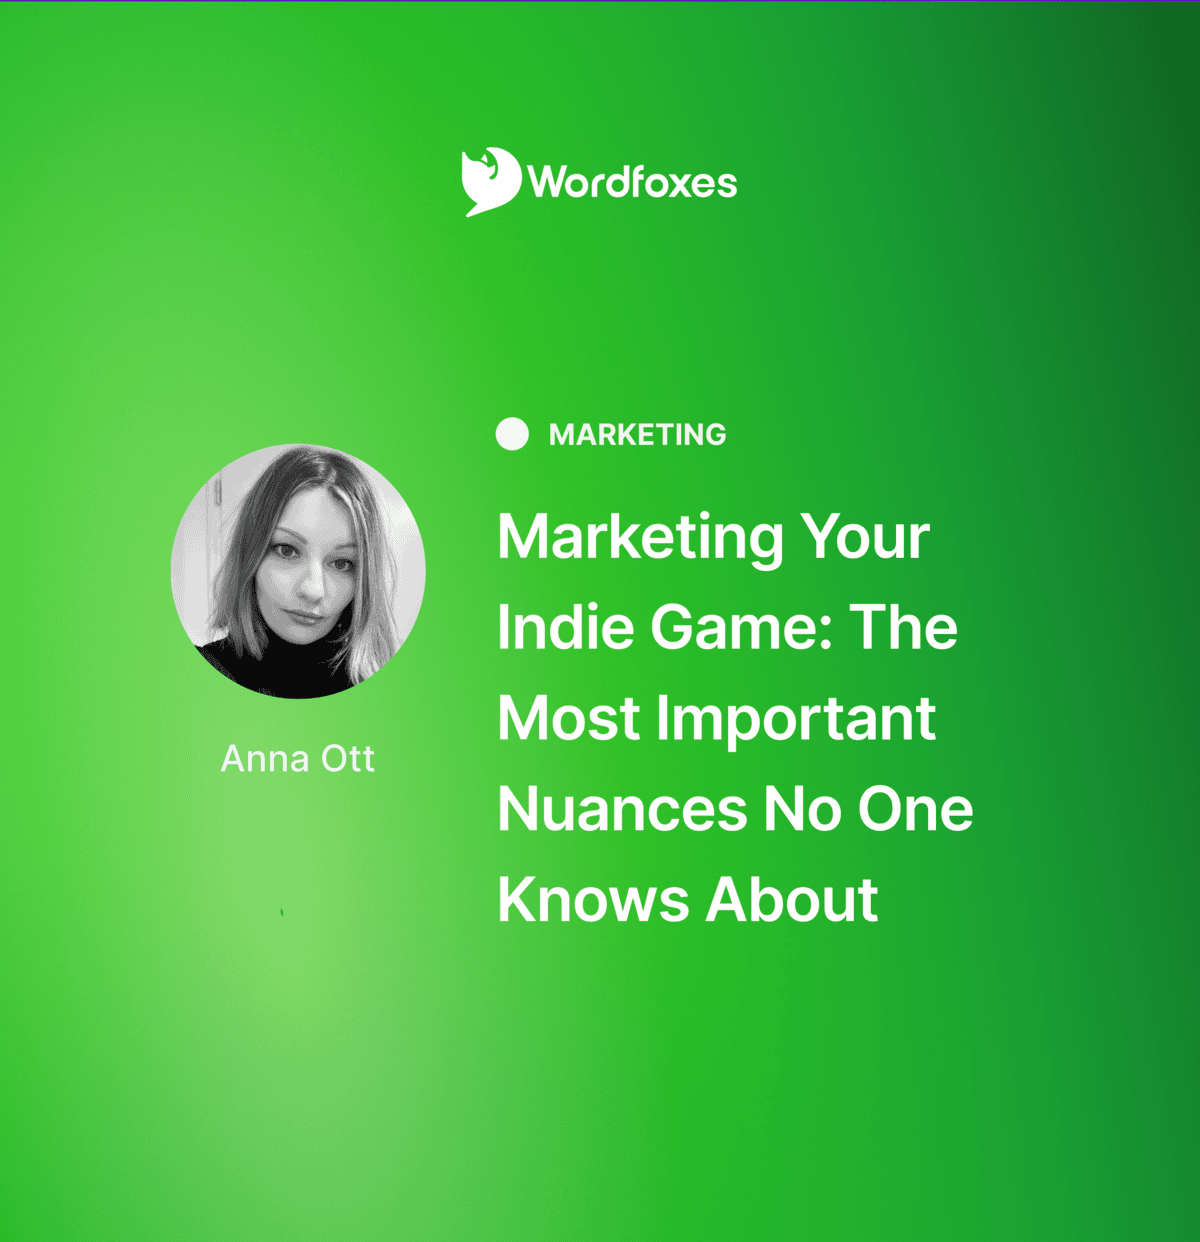 Marketing Your Indie Game: The Most Important Nuances No One Knows About